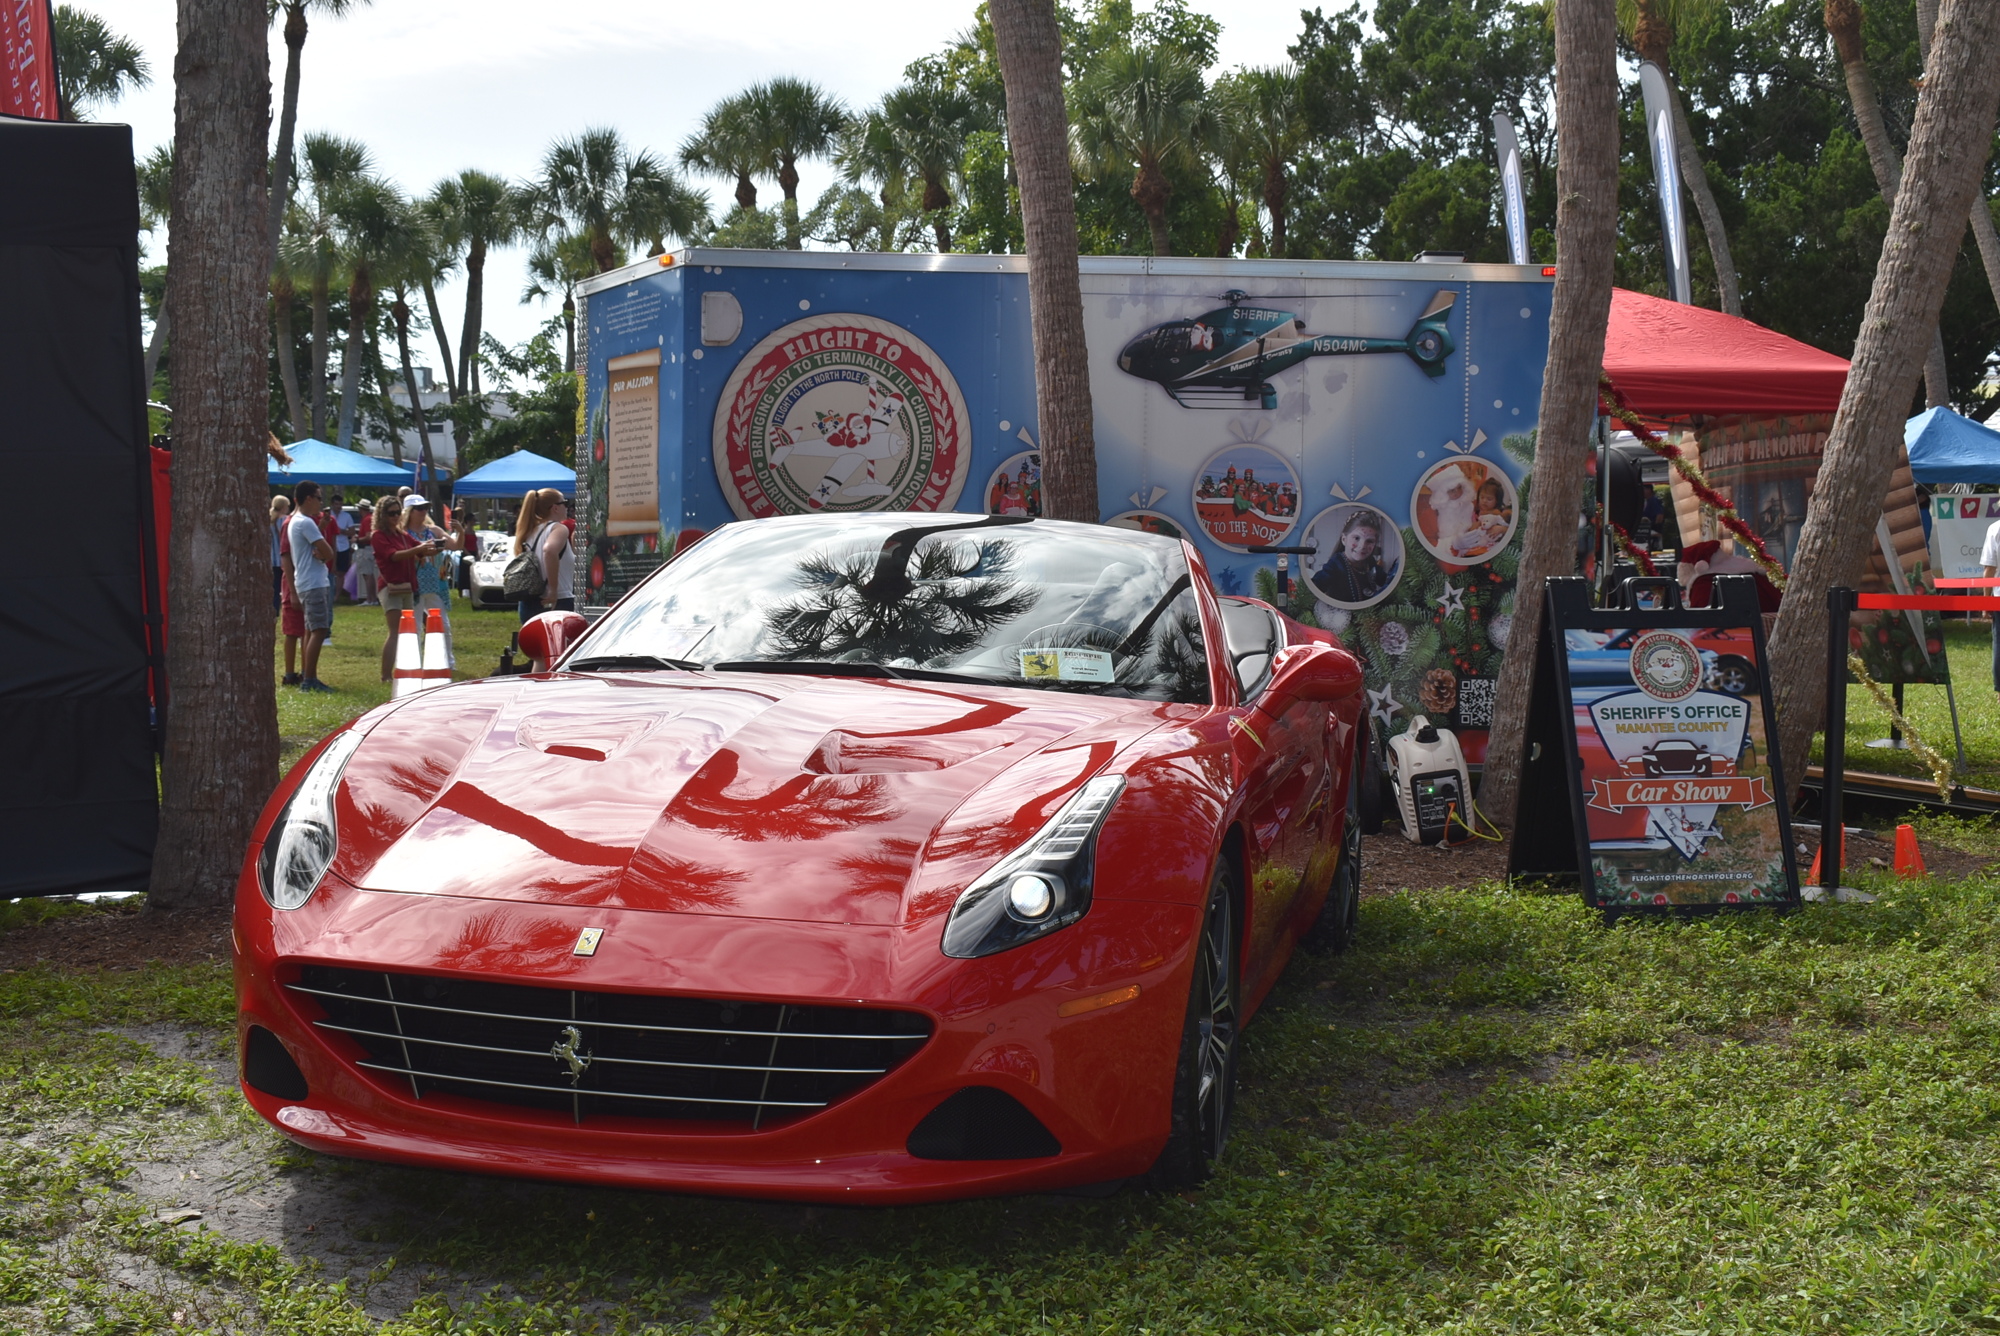 One Ferrari sits next to the trailer for Flight to the North Pole at St. Armands Circle.